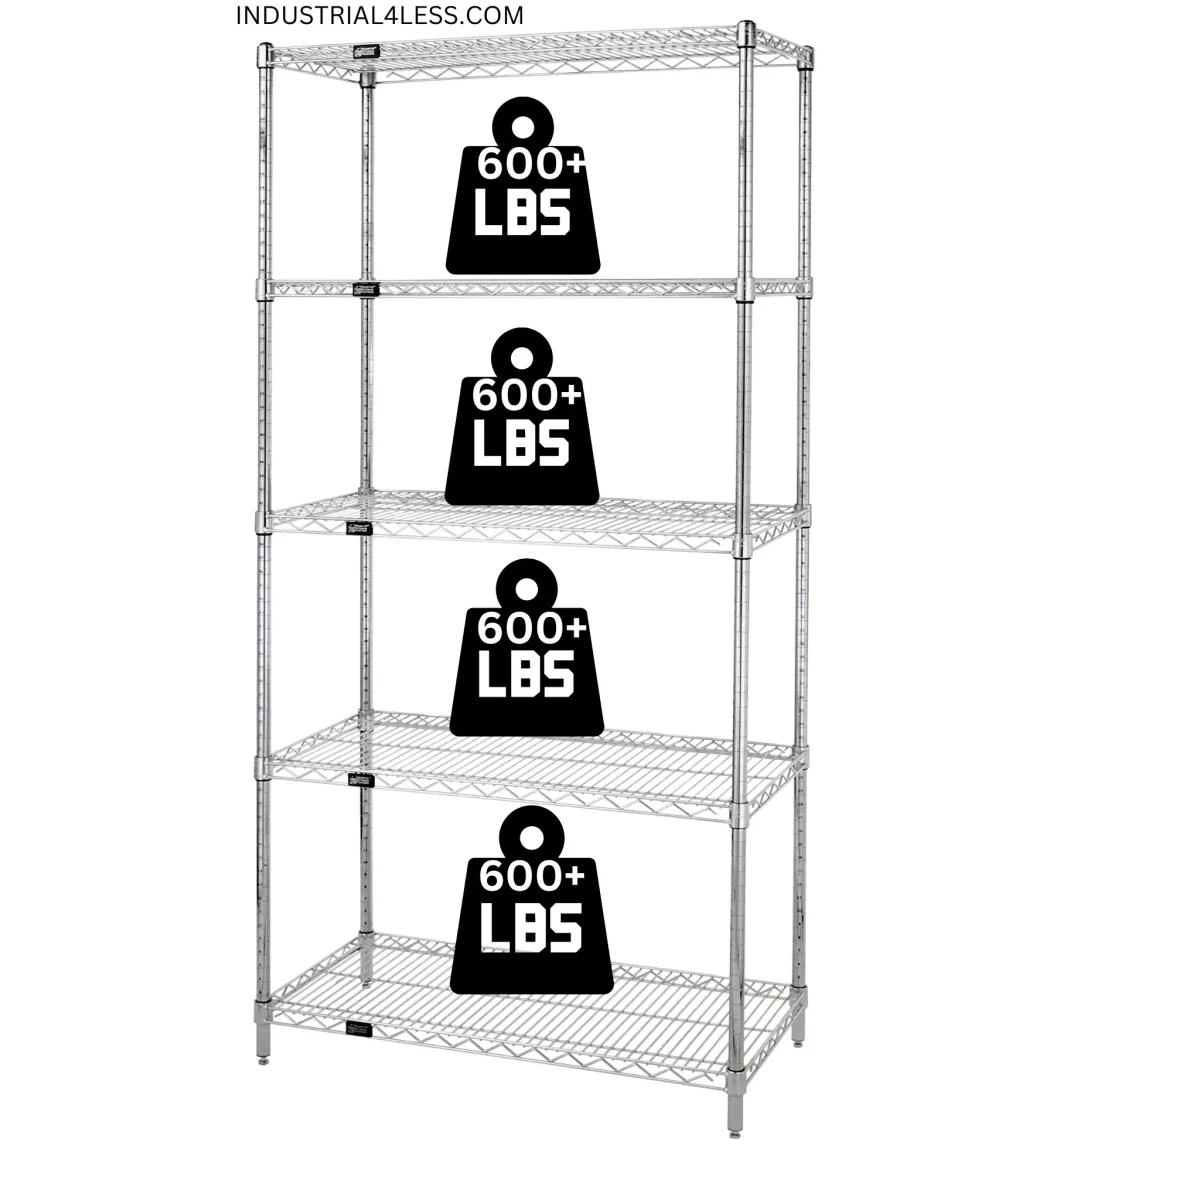 18" x 60" Stainless Steel Wire Shelving Unit - Industrial 4 Less - 18605S-5